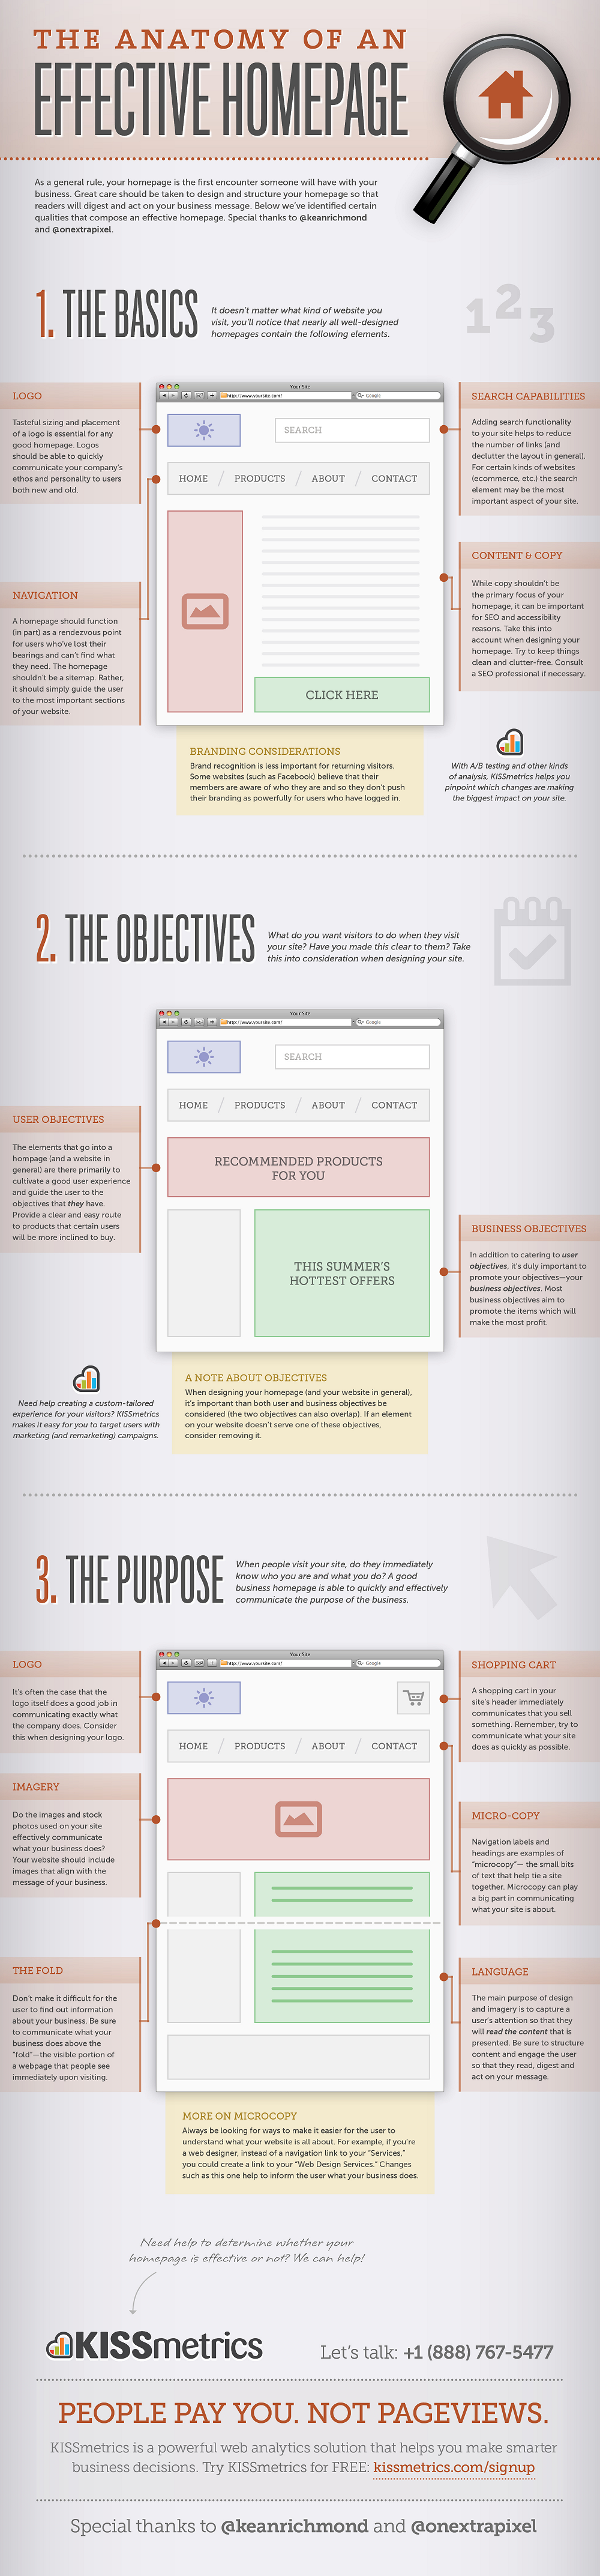 The Anatomy of an Effective Homepage